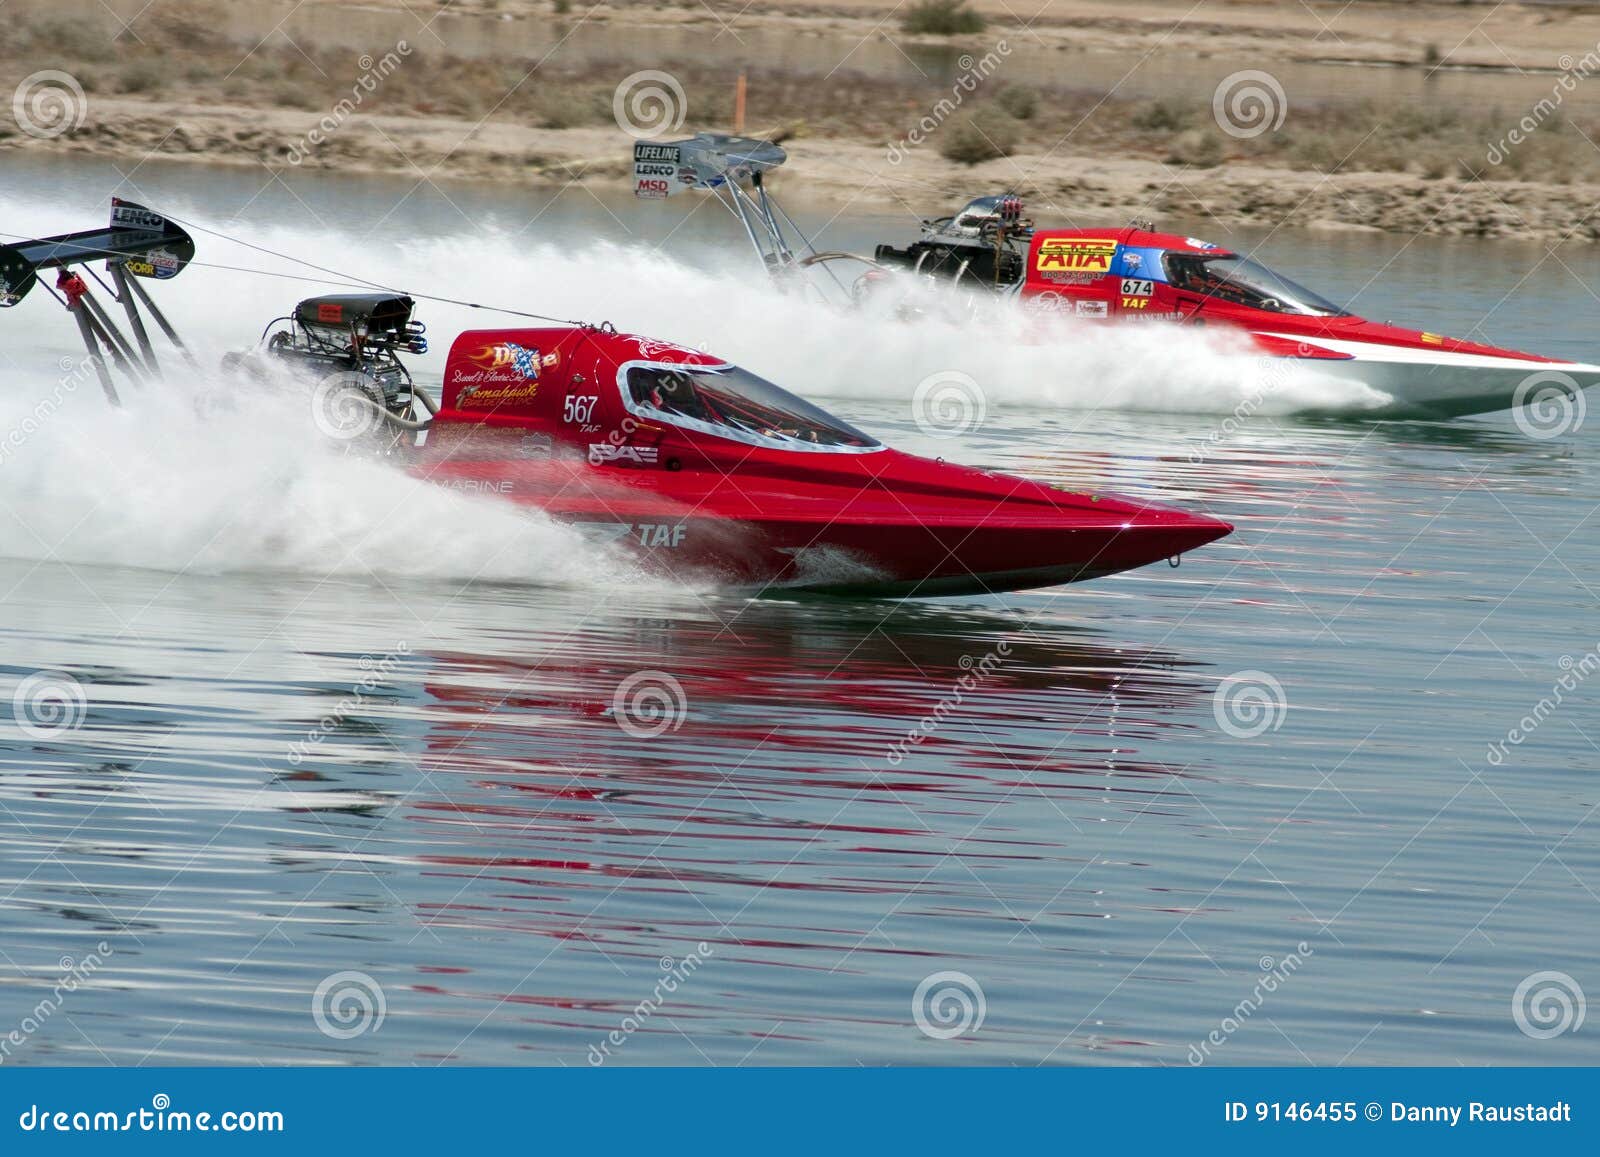 Lucas Oil Drag Boat Schedule 2022 429 Drag Light Racing Photos - Free & Royalty-Free Stock Photos From  Dreamstime